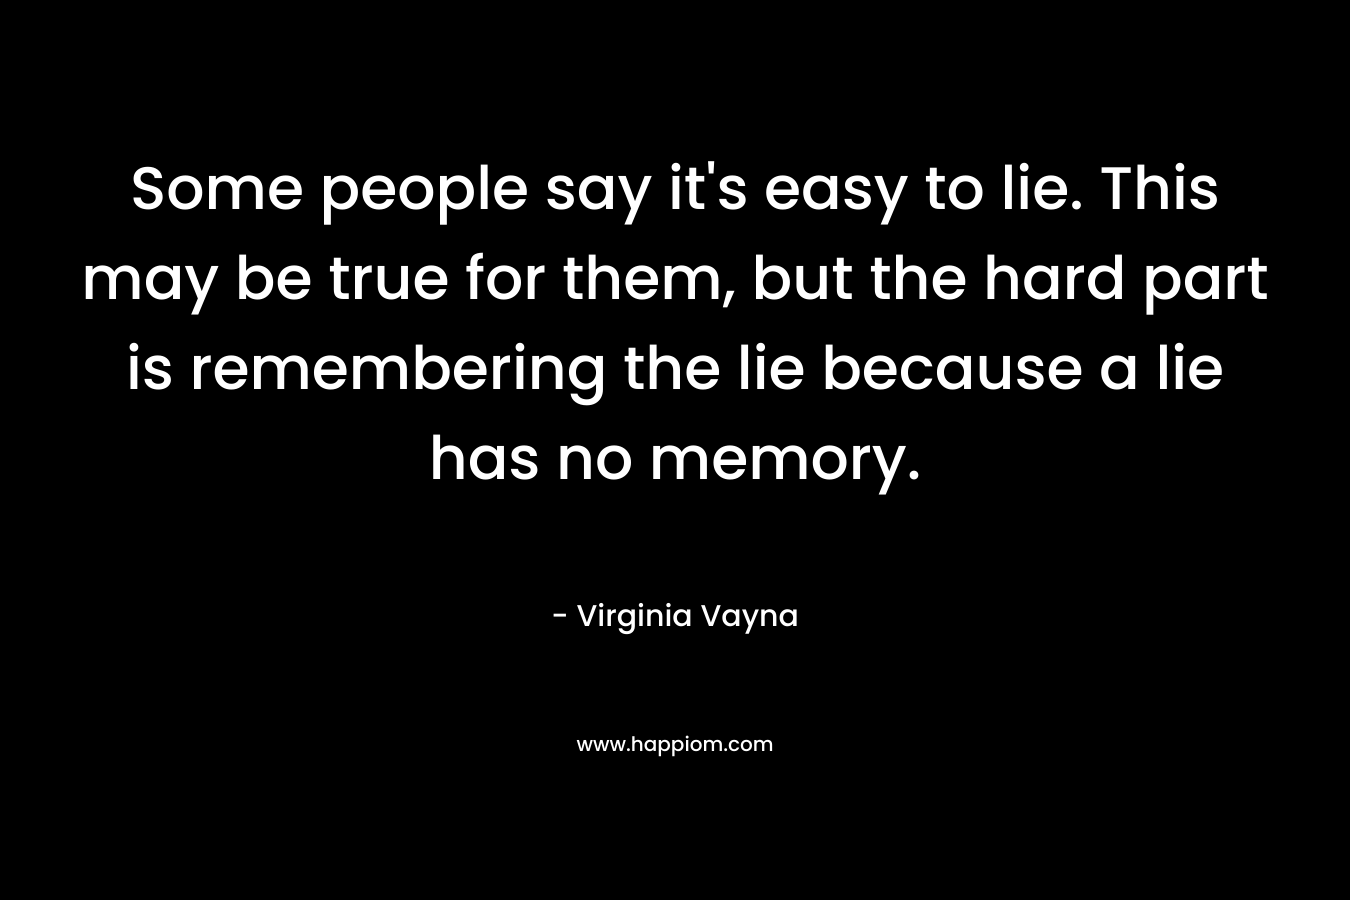 Some people say it's easy to lie. This may be true for them, but the hard part is remembering the lie because a lie has no memory.